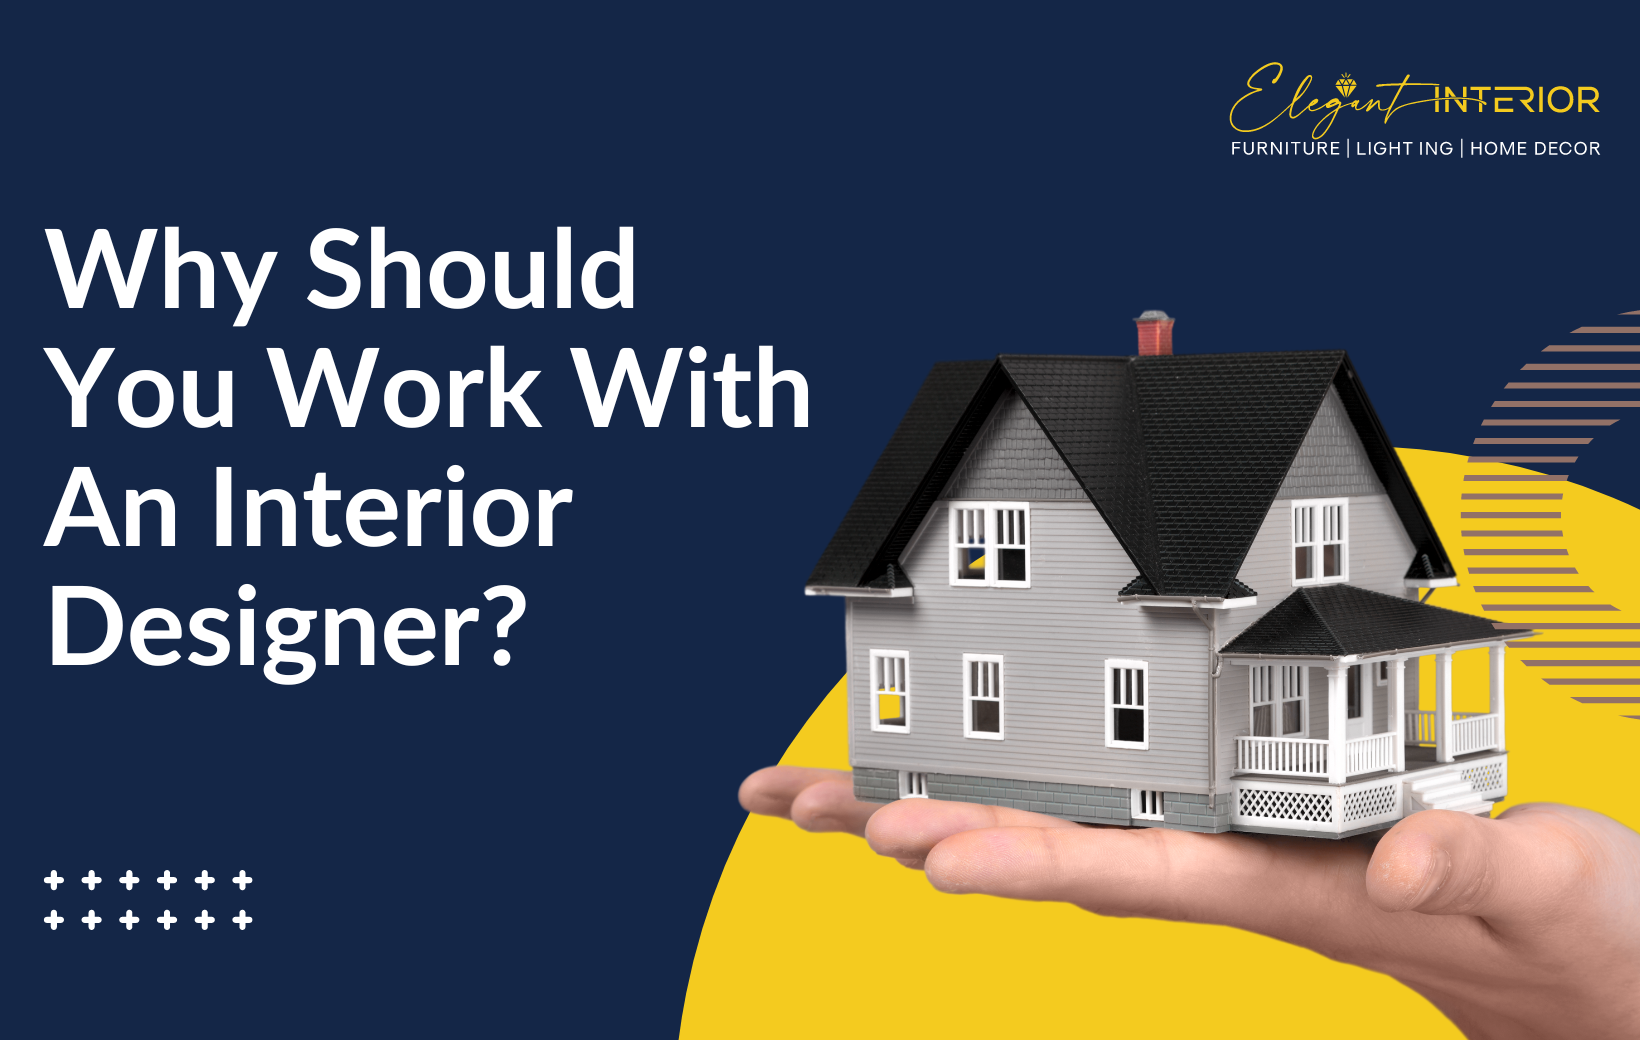 Why Should You Work With An Interior Designer While Designing A New Home?